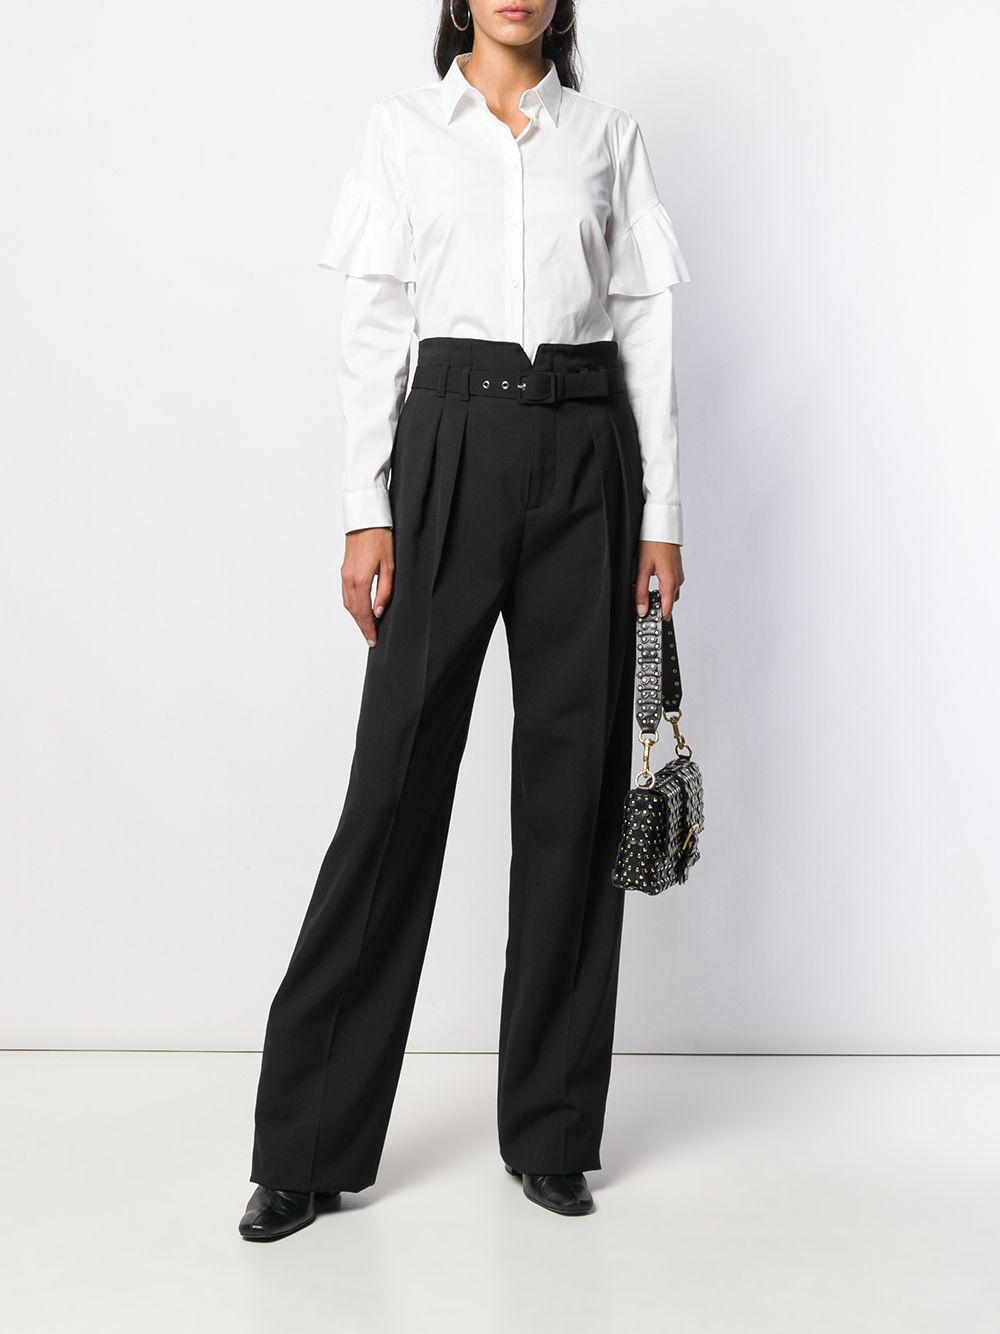 RED Valentino High Waist Trousers - Farfetch